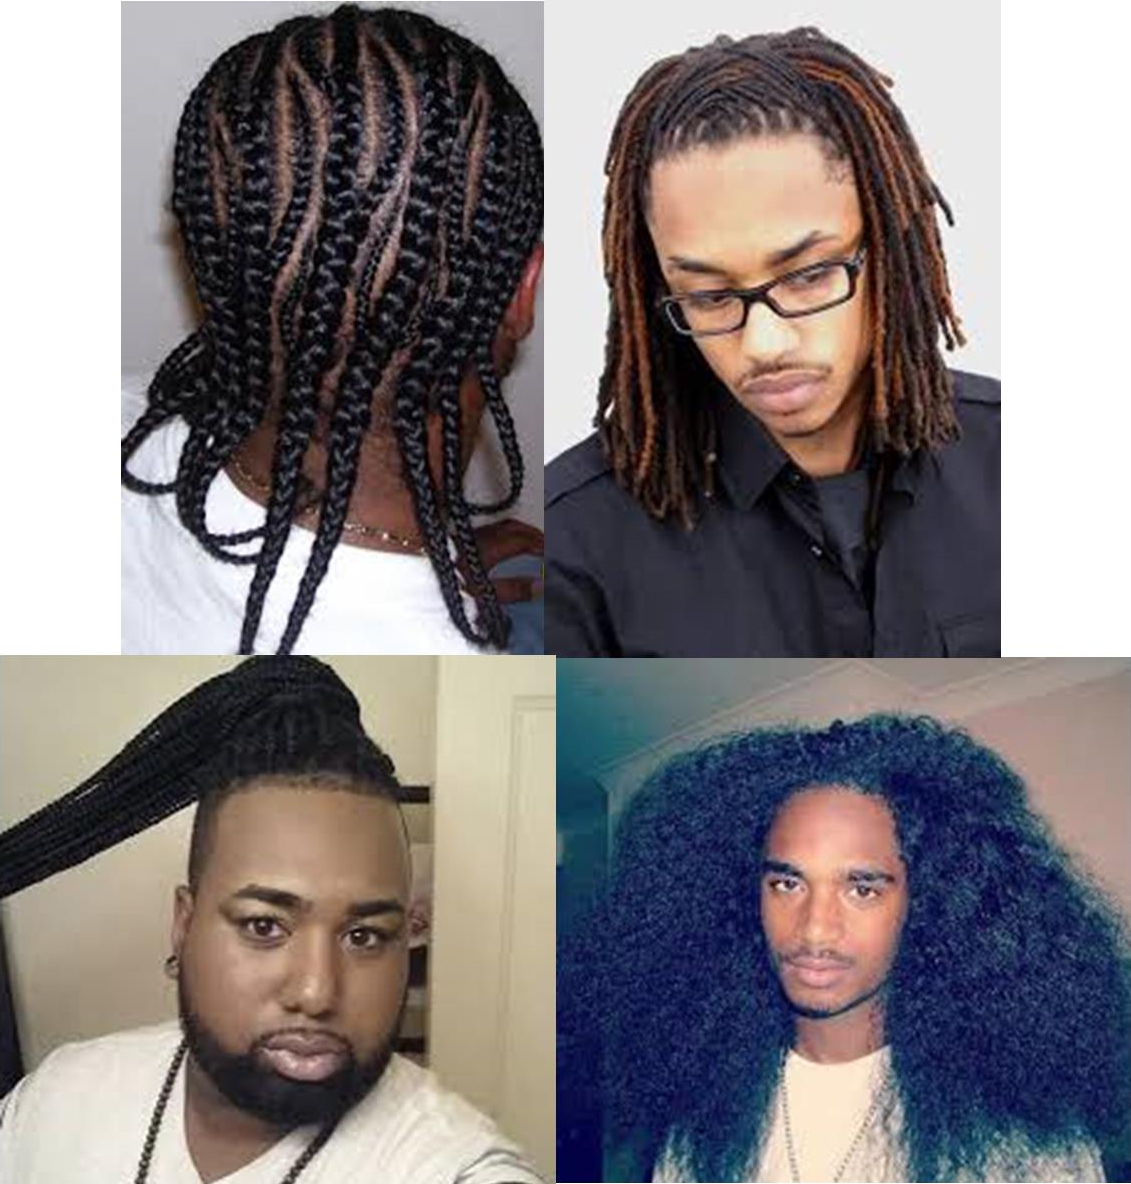 Jamaica Gleaner - The same week his state outlawed racial discrimination  based on hairstyles, a black high school student in Texas was suspended  because school officials said his locs violated the district's